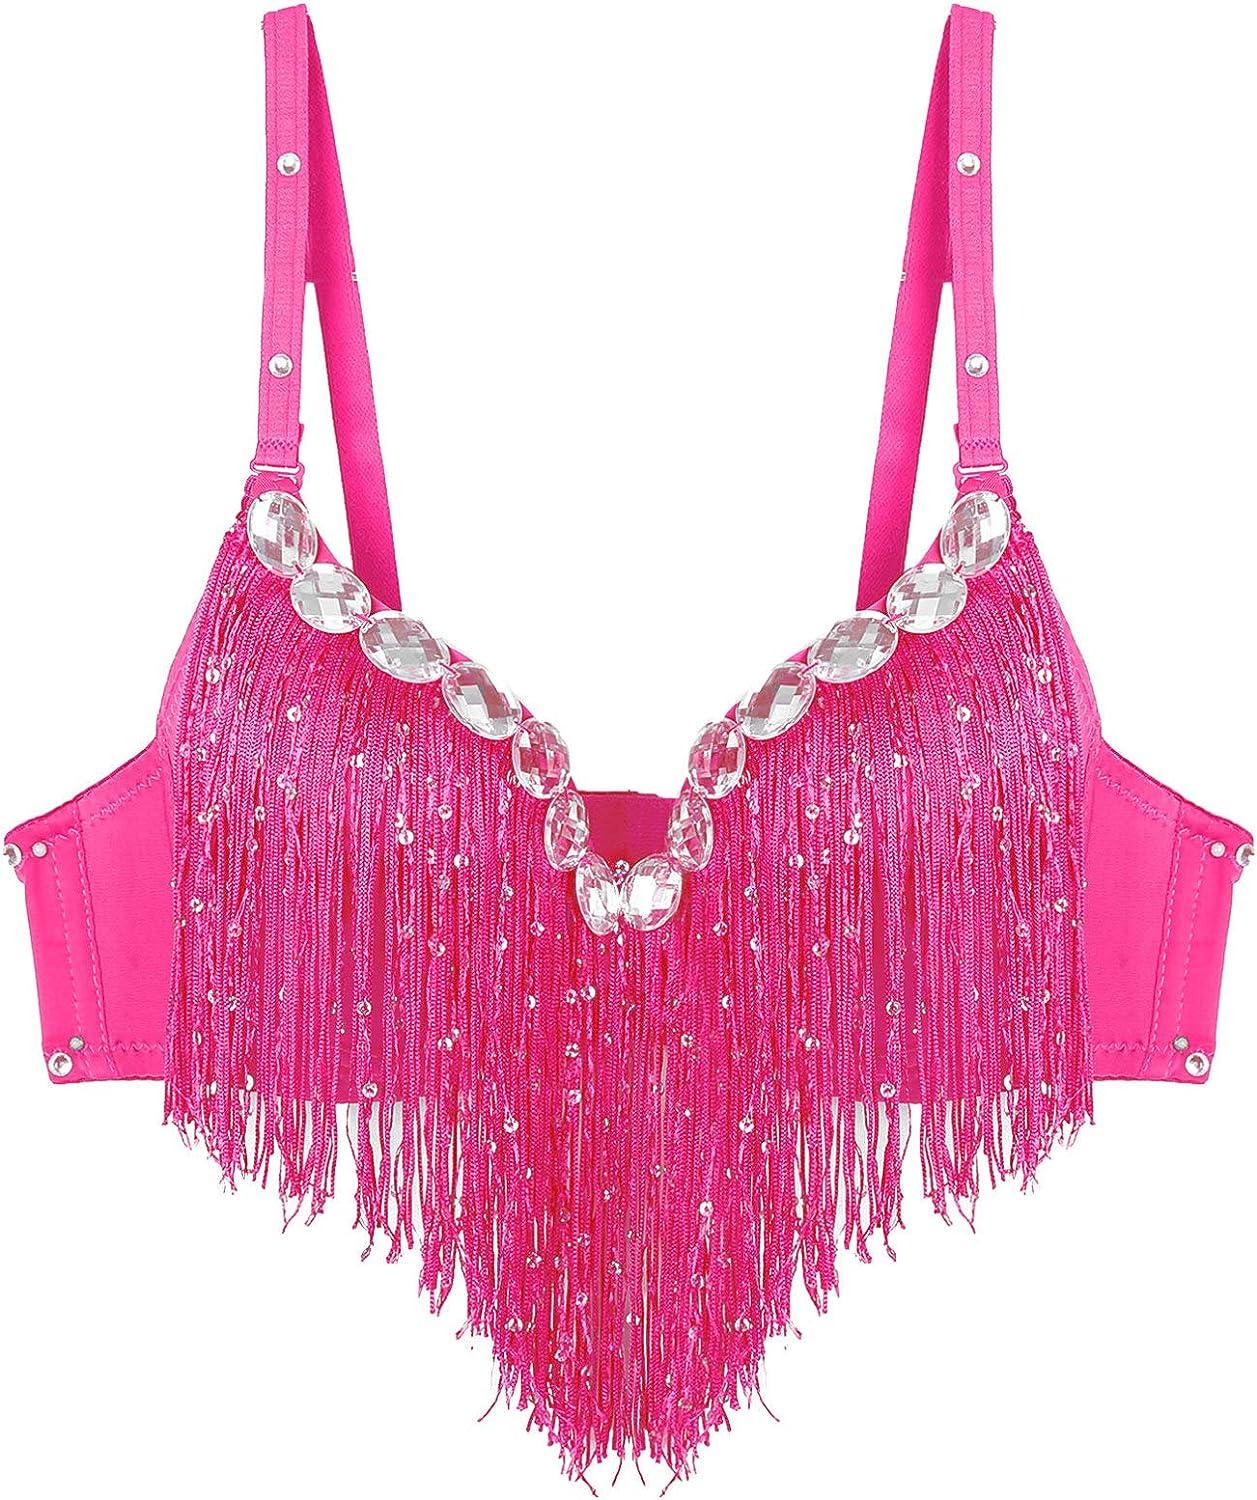 LiiYii Women's Belly Dance Push-Up Bra Latin Sequins Tassel Brassiere Tops  Shirts Stage Performance Costume Hot Pink One Size